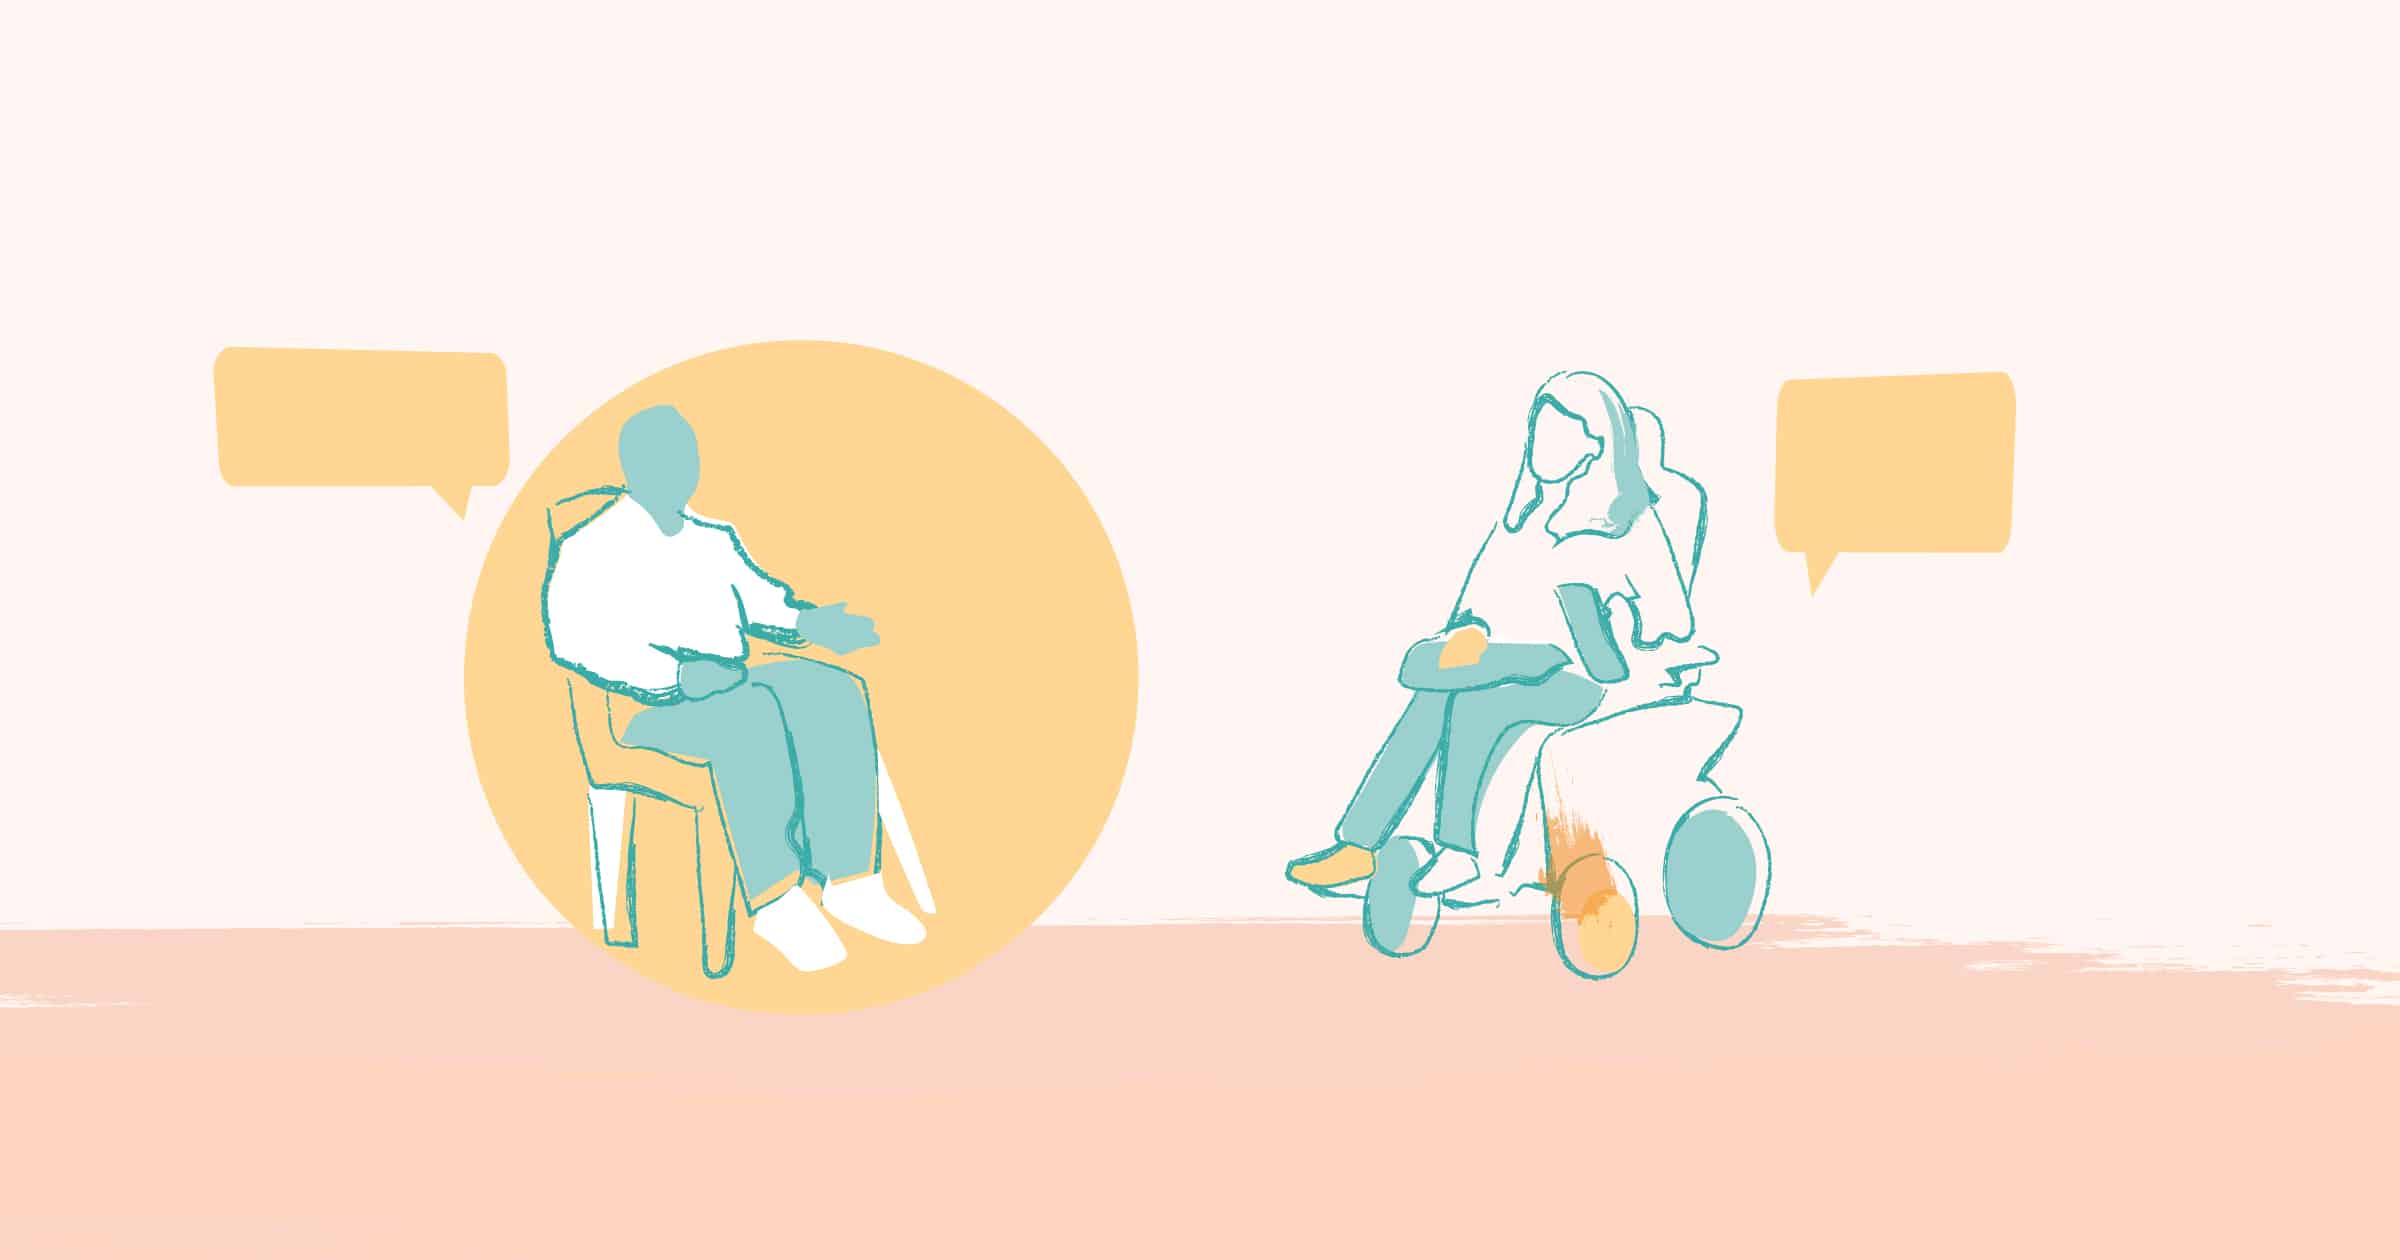 Illustration outline of two figures, one sitting in a chair on the left and one with a wheelchair on the right, outlined in blue. They have orange speech bubbles and the background is a light pink color.